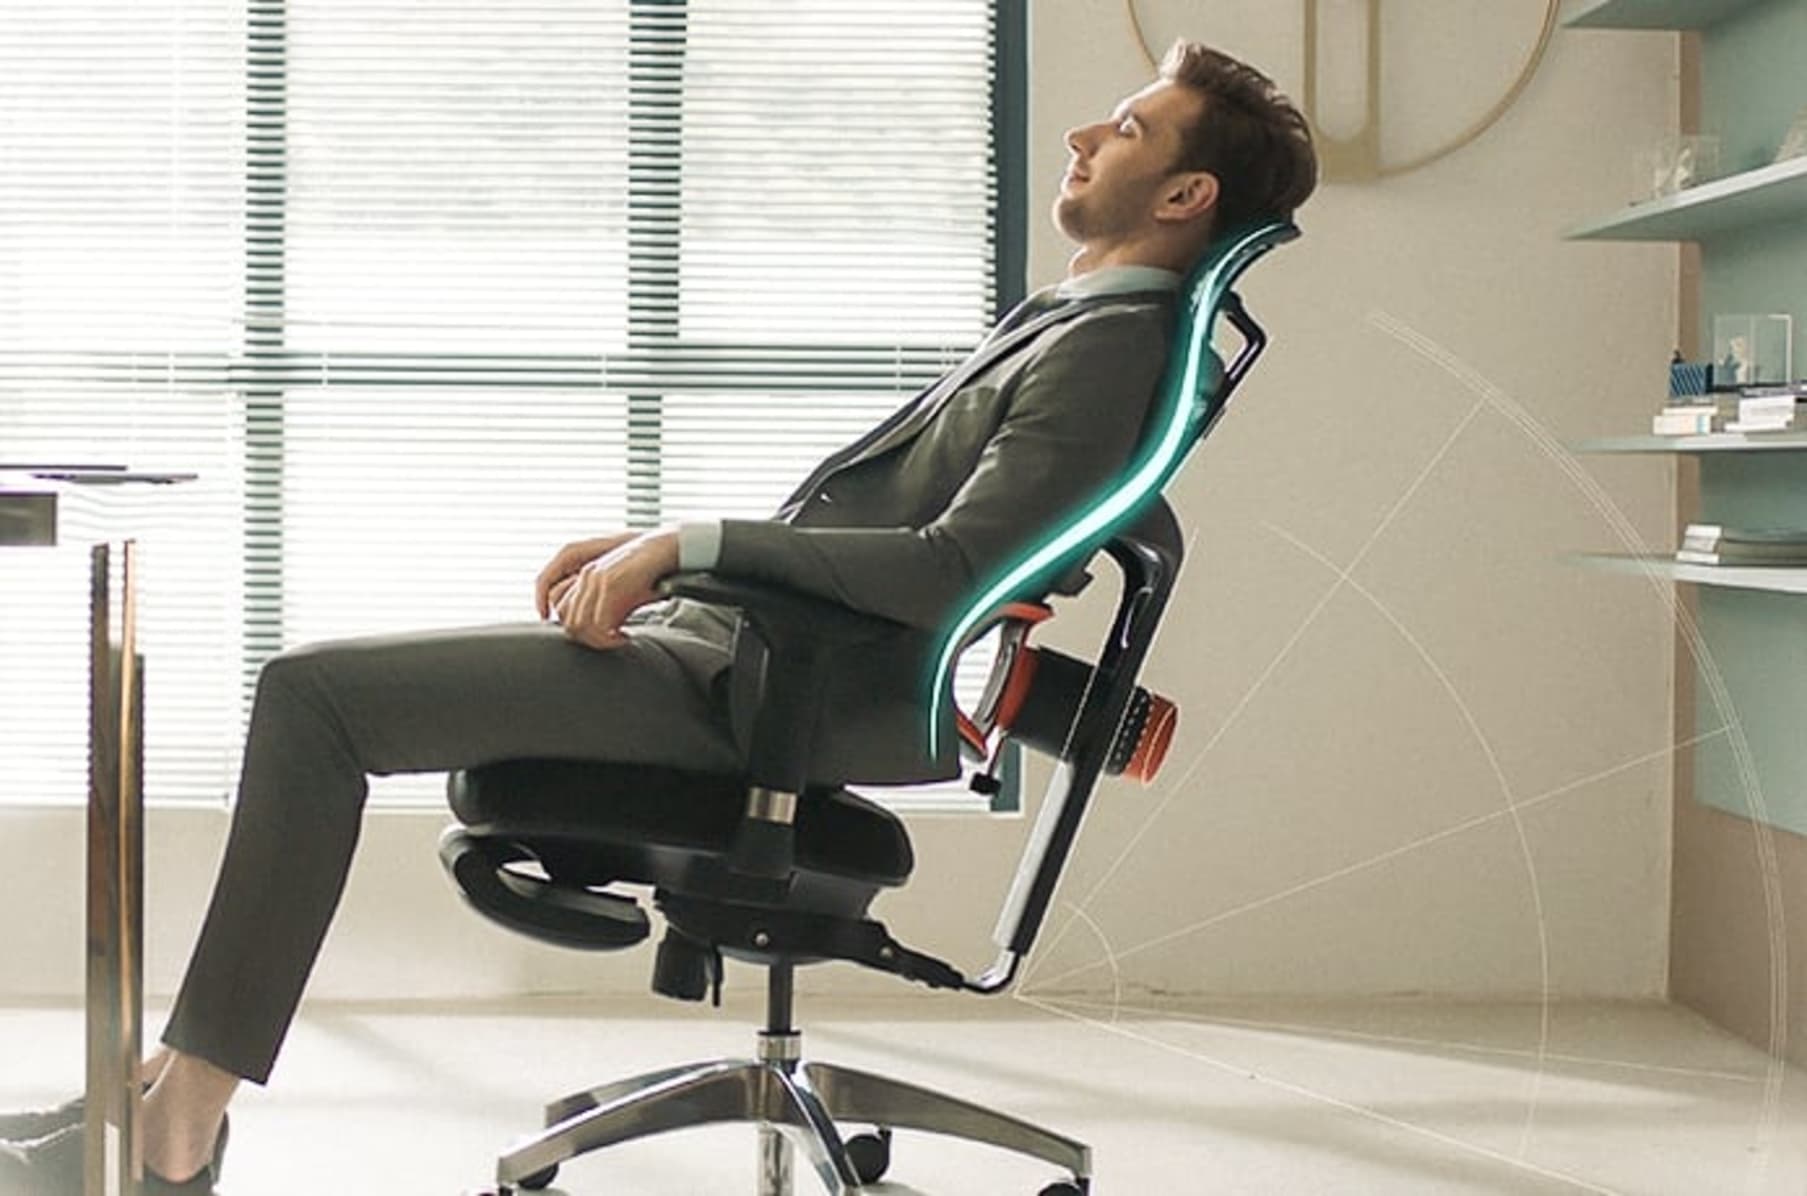 NEWTRAL - Ergonomic Chair For Sitting Long Hours | Indiegogo